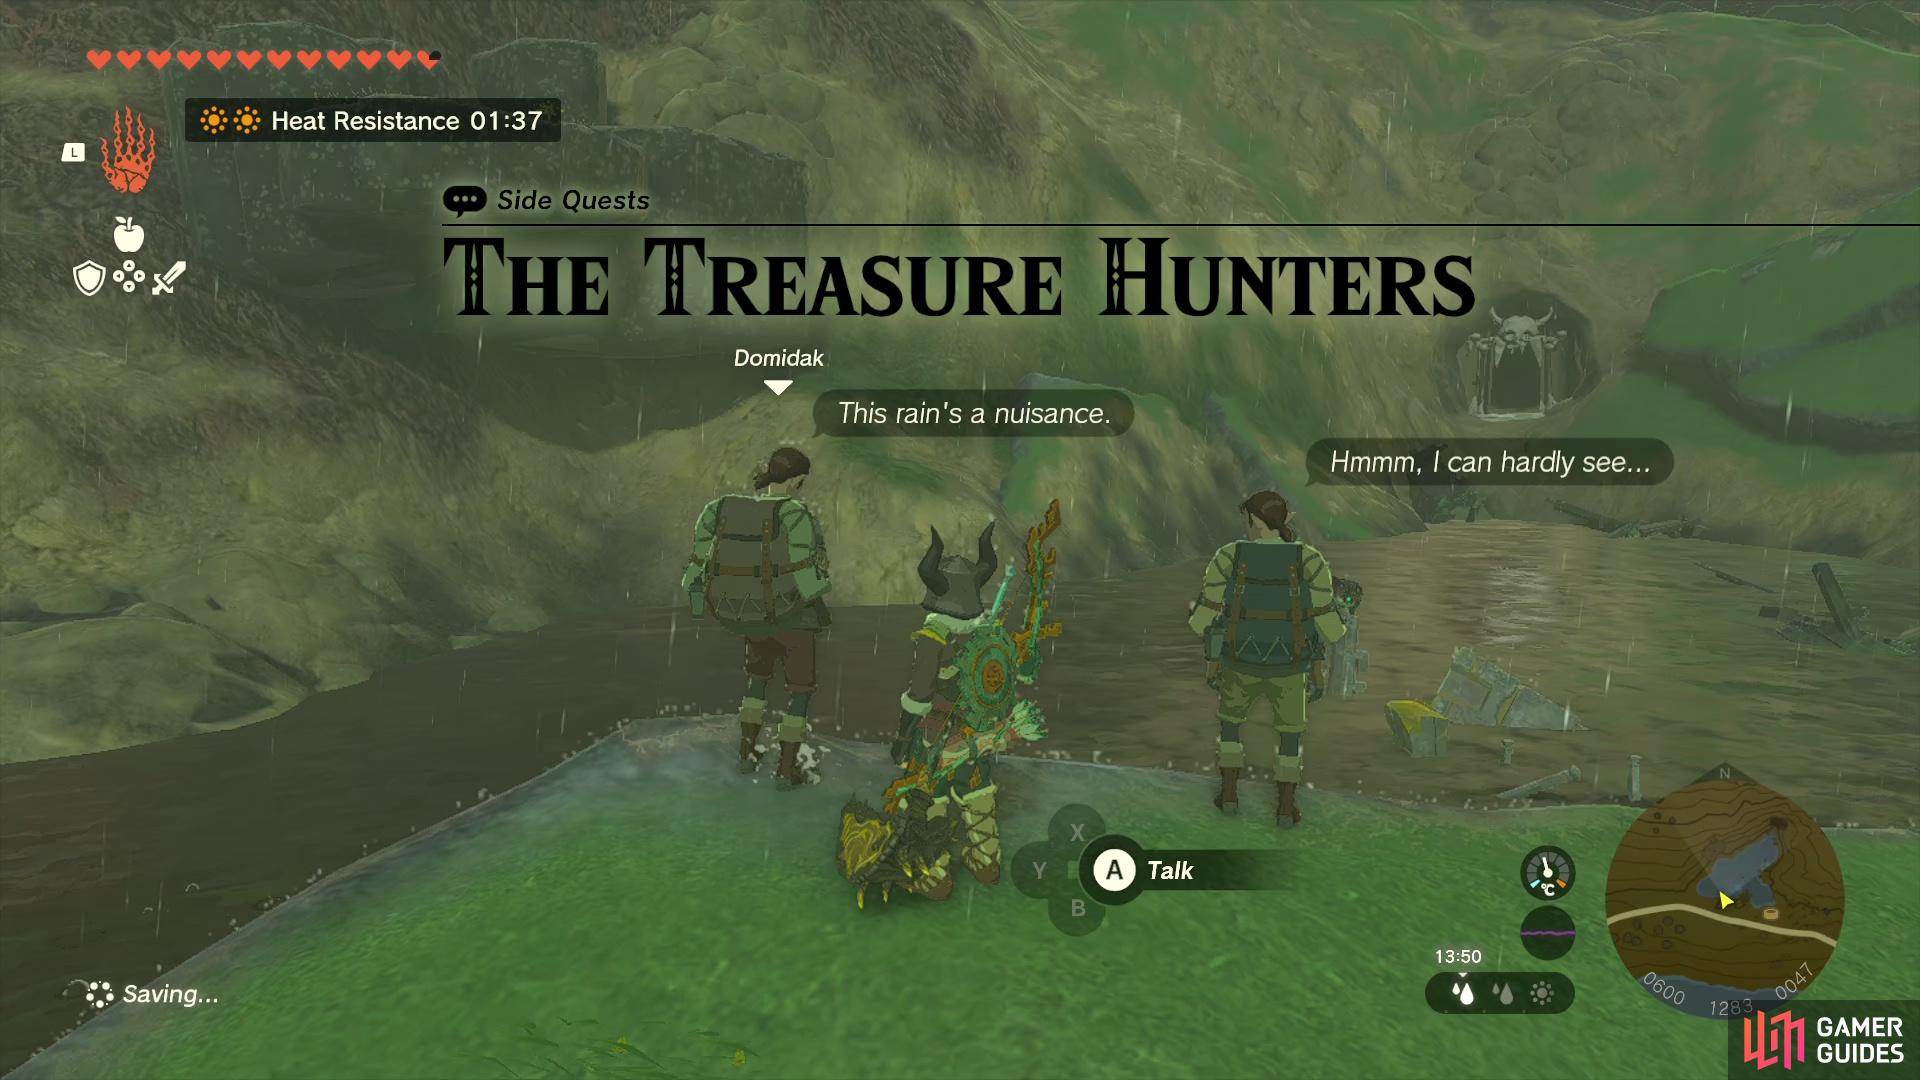 The Treasure Hunters is a simple side quest in Zelda Tears of the Kingdom.